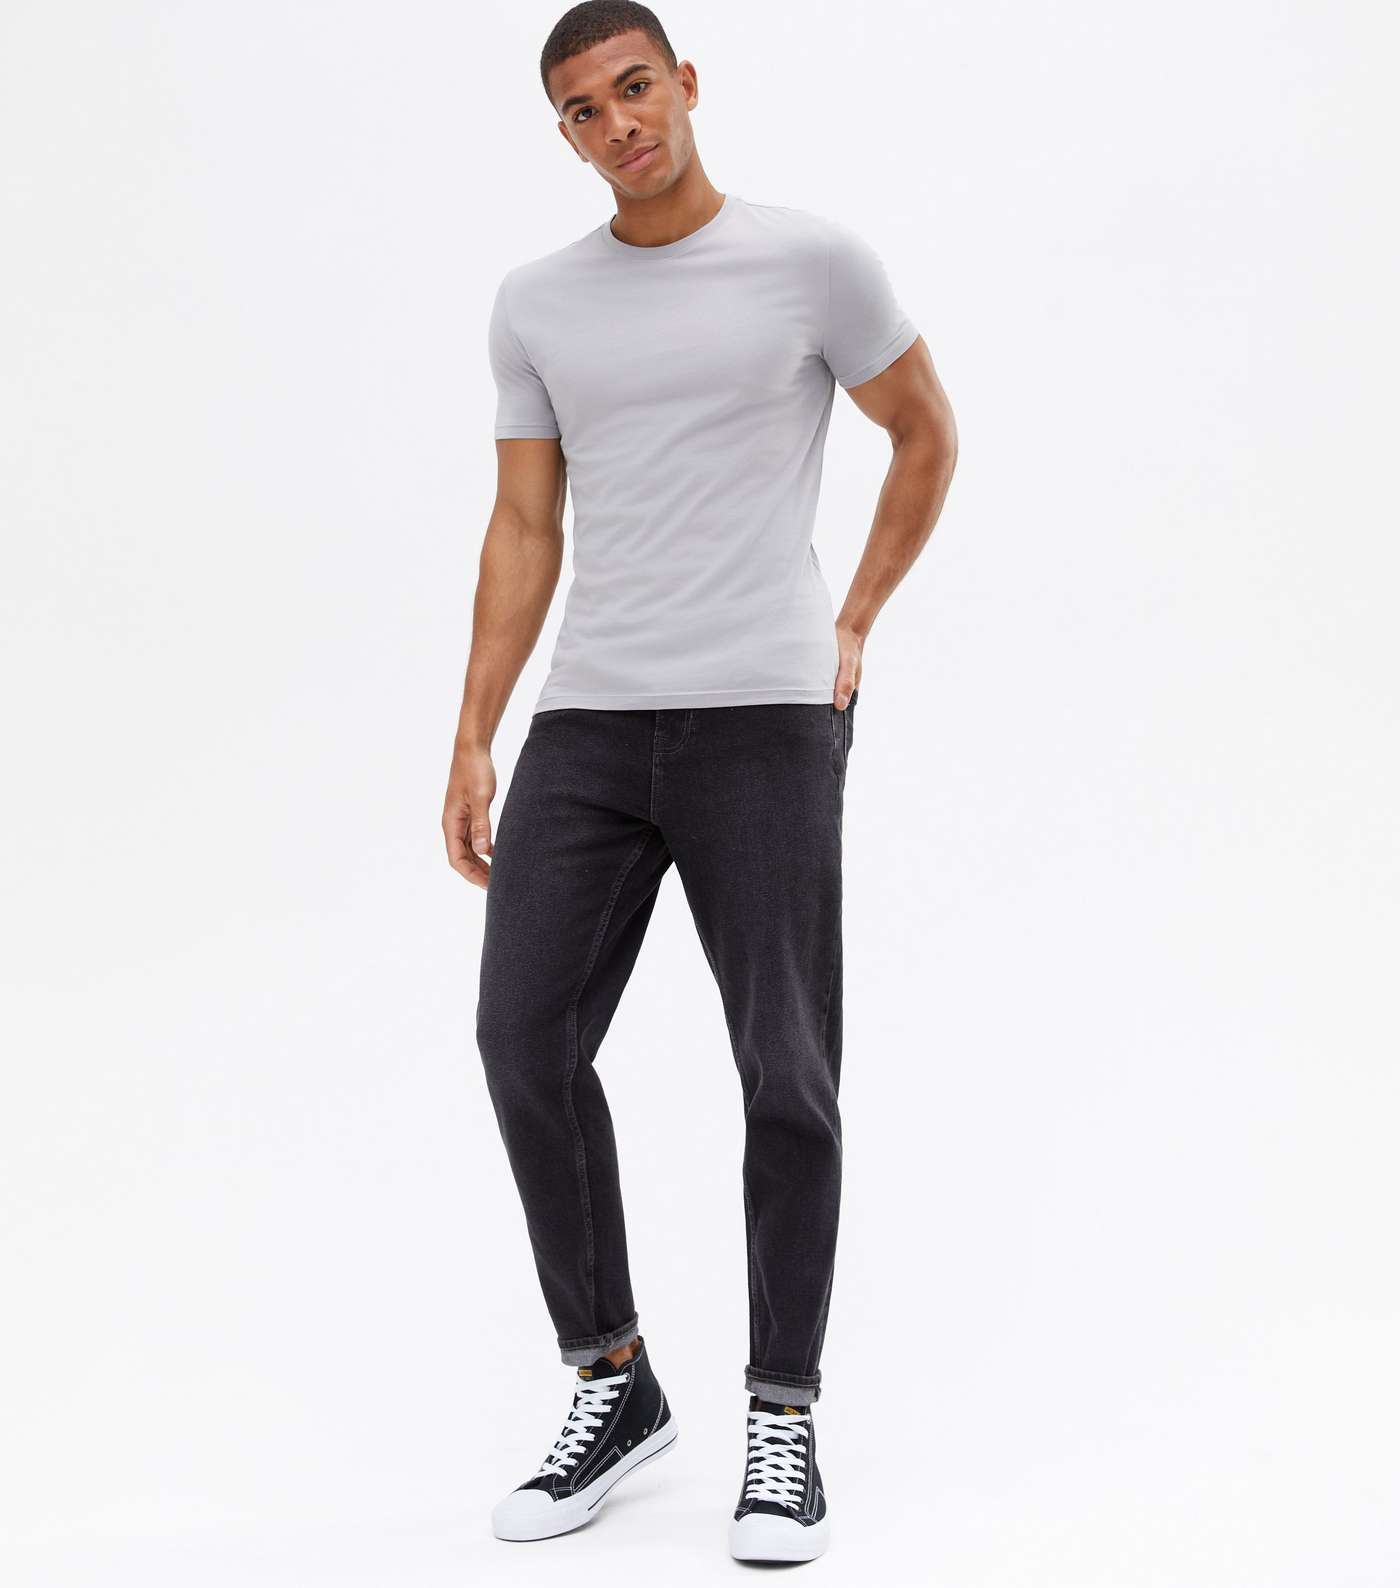 Pale Grey Muscle Fit Crew Neck T-Shirt Image 3